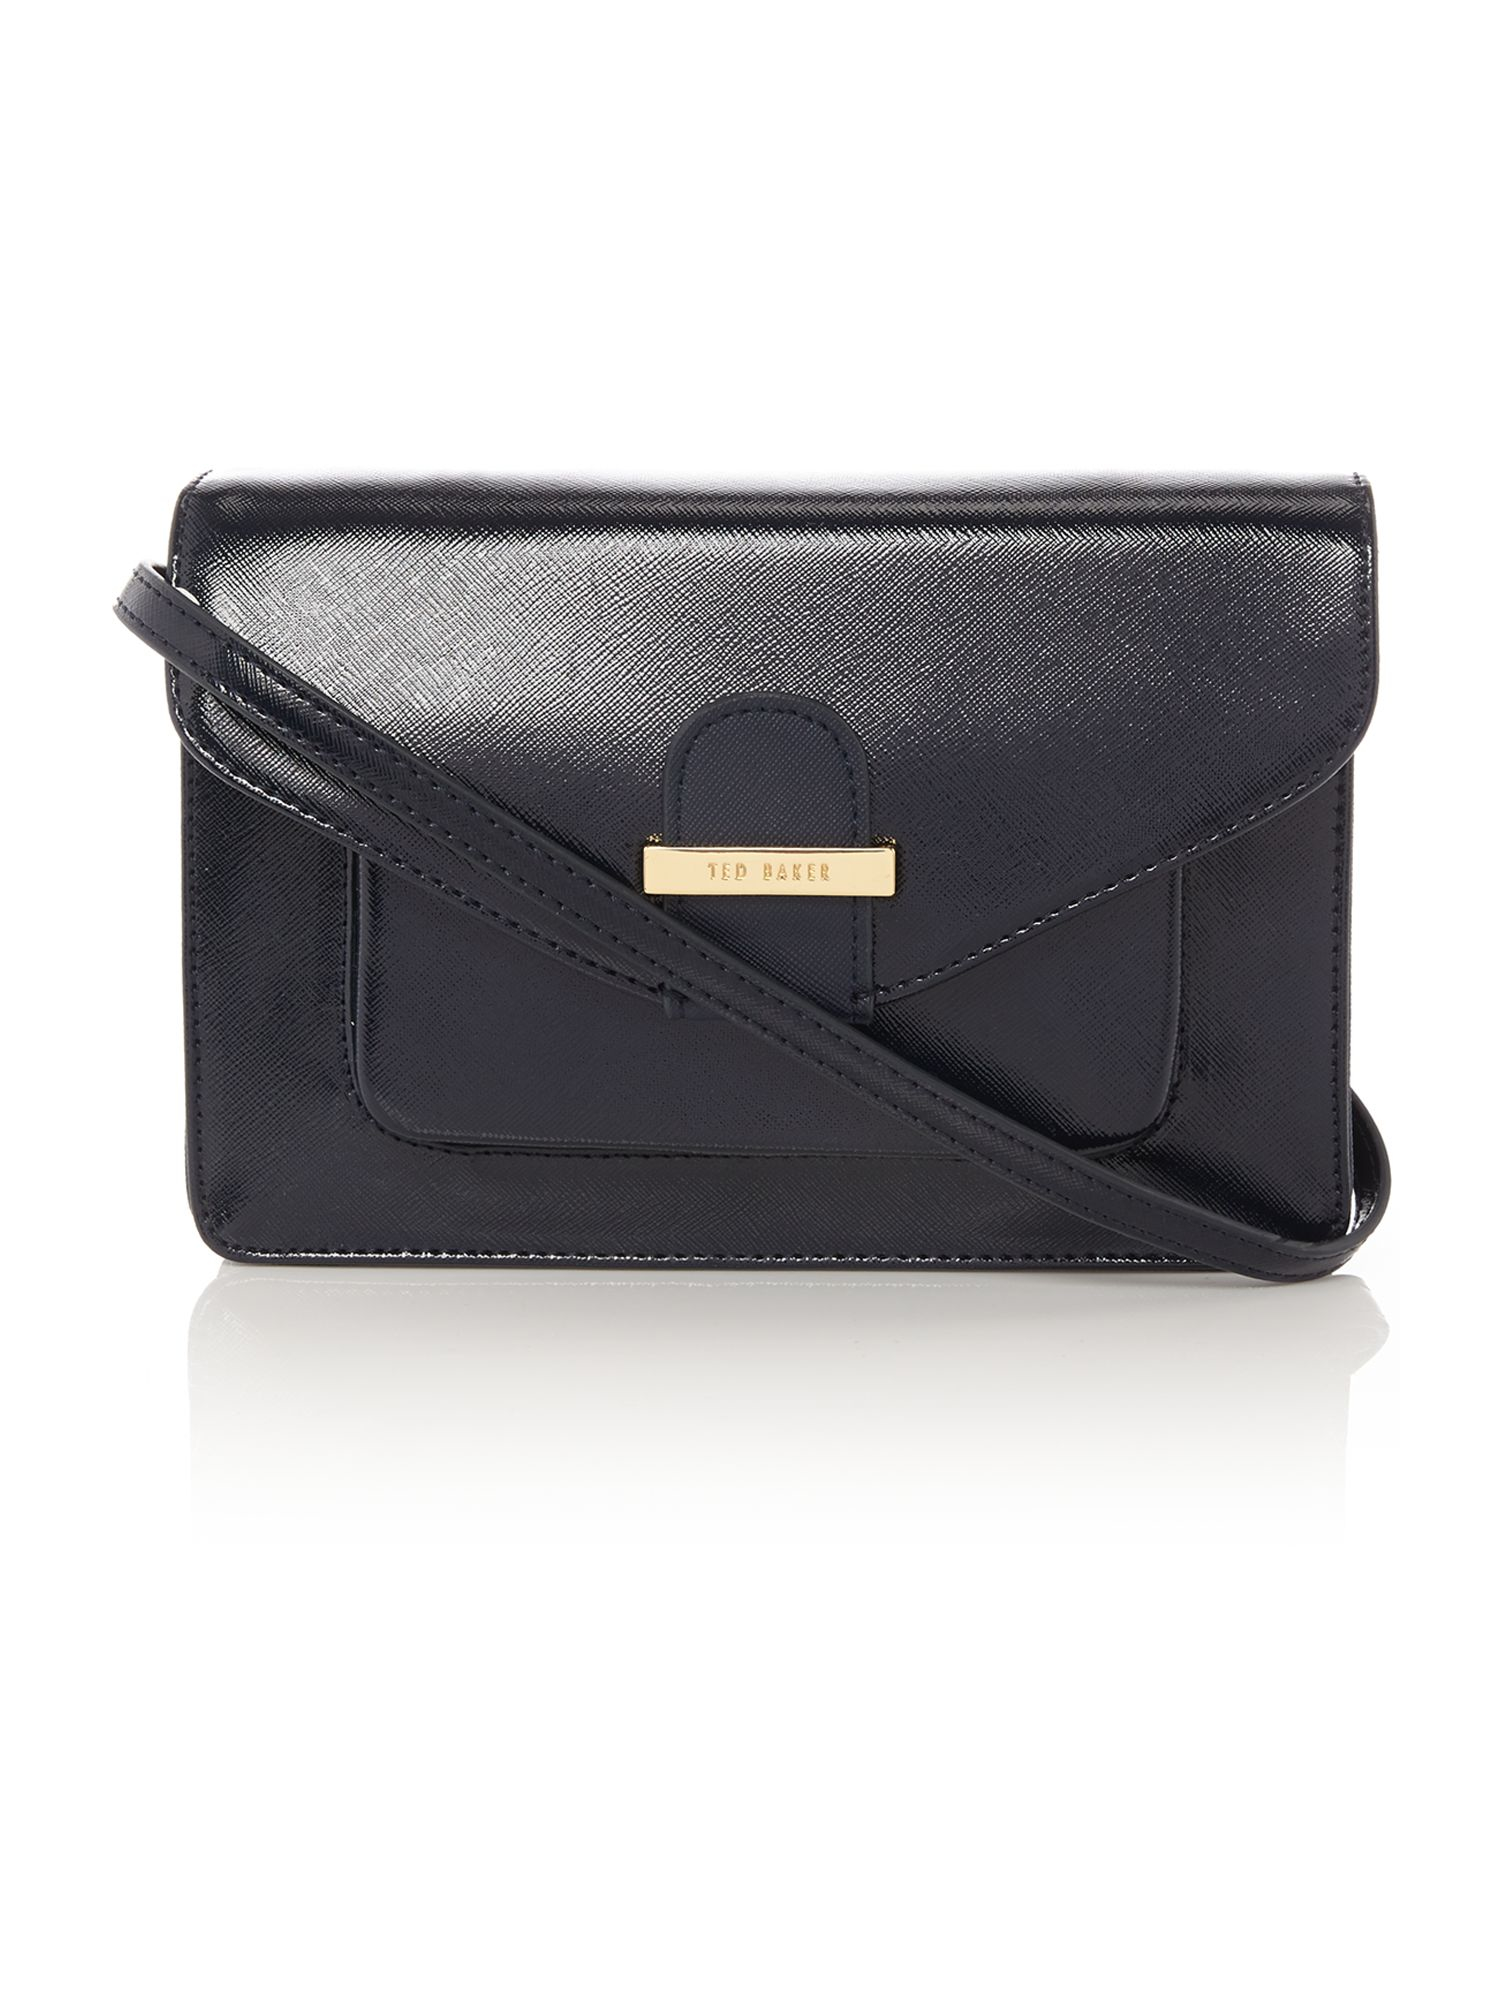 Ted baker Lainey Navy Patent Cross Body Bag in Blue | Lyst